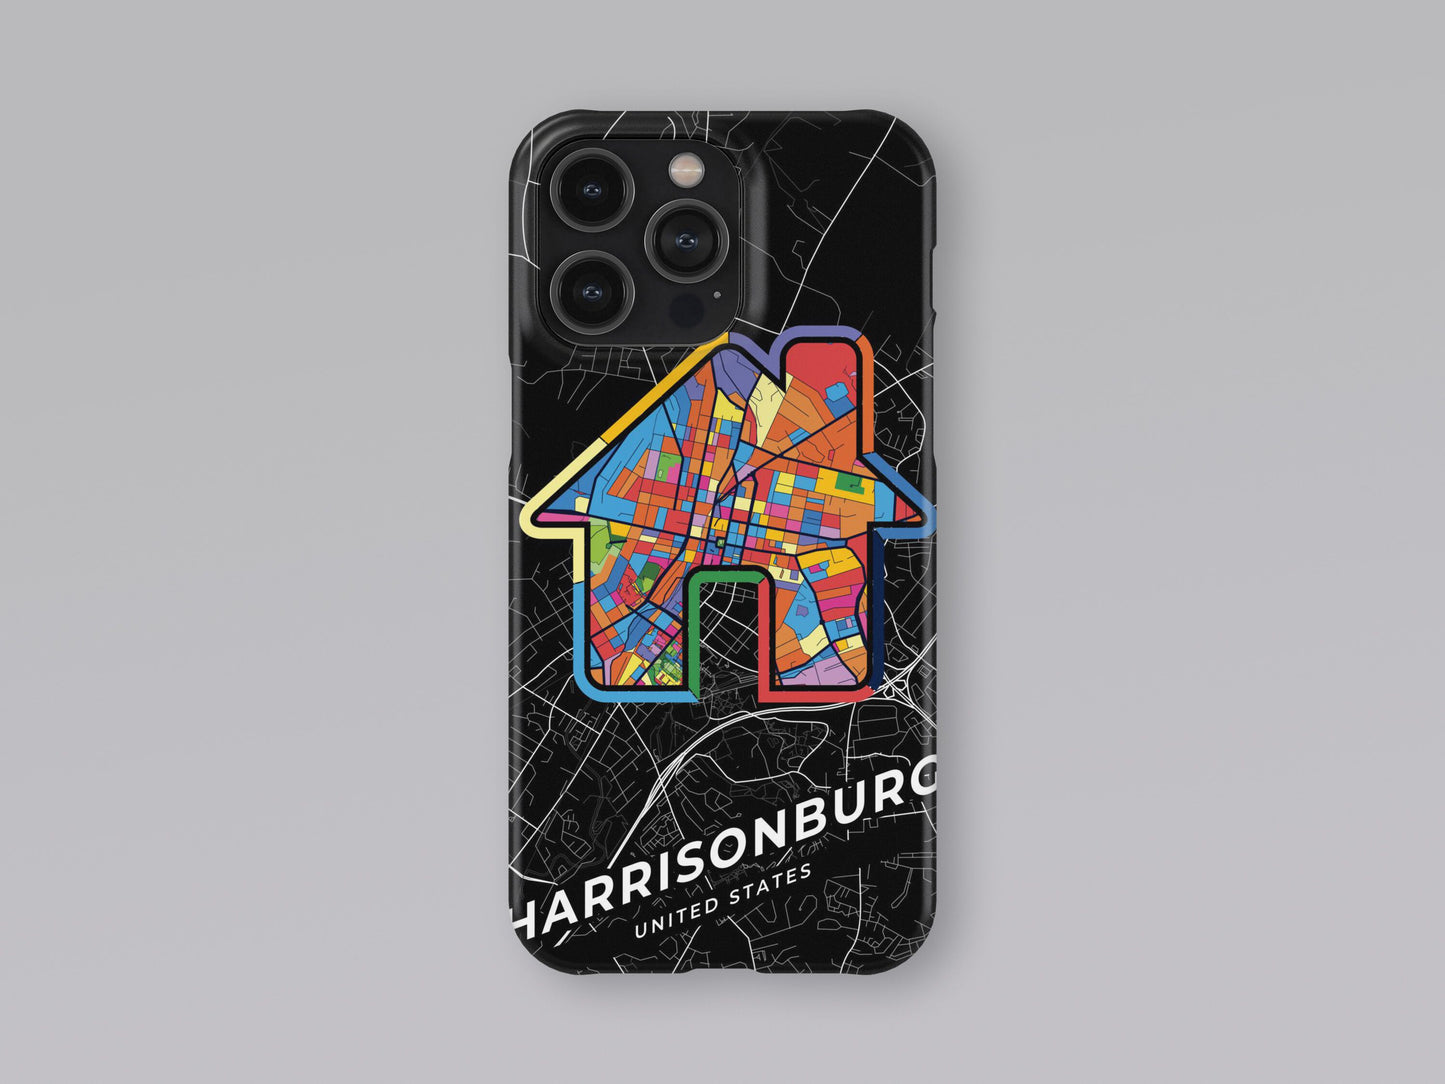 Harrisonburg Virginia slim phone case with colorful icon. Birthday, wedding or housewarming gift. Couple match cases. 3